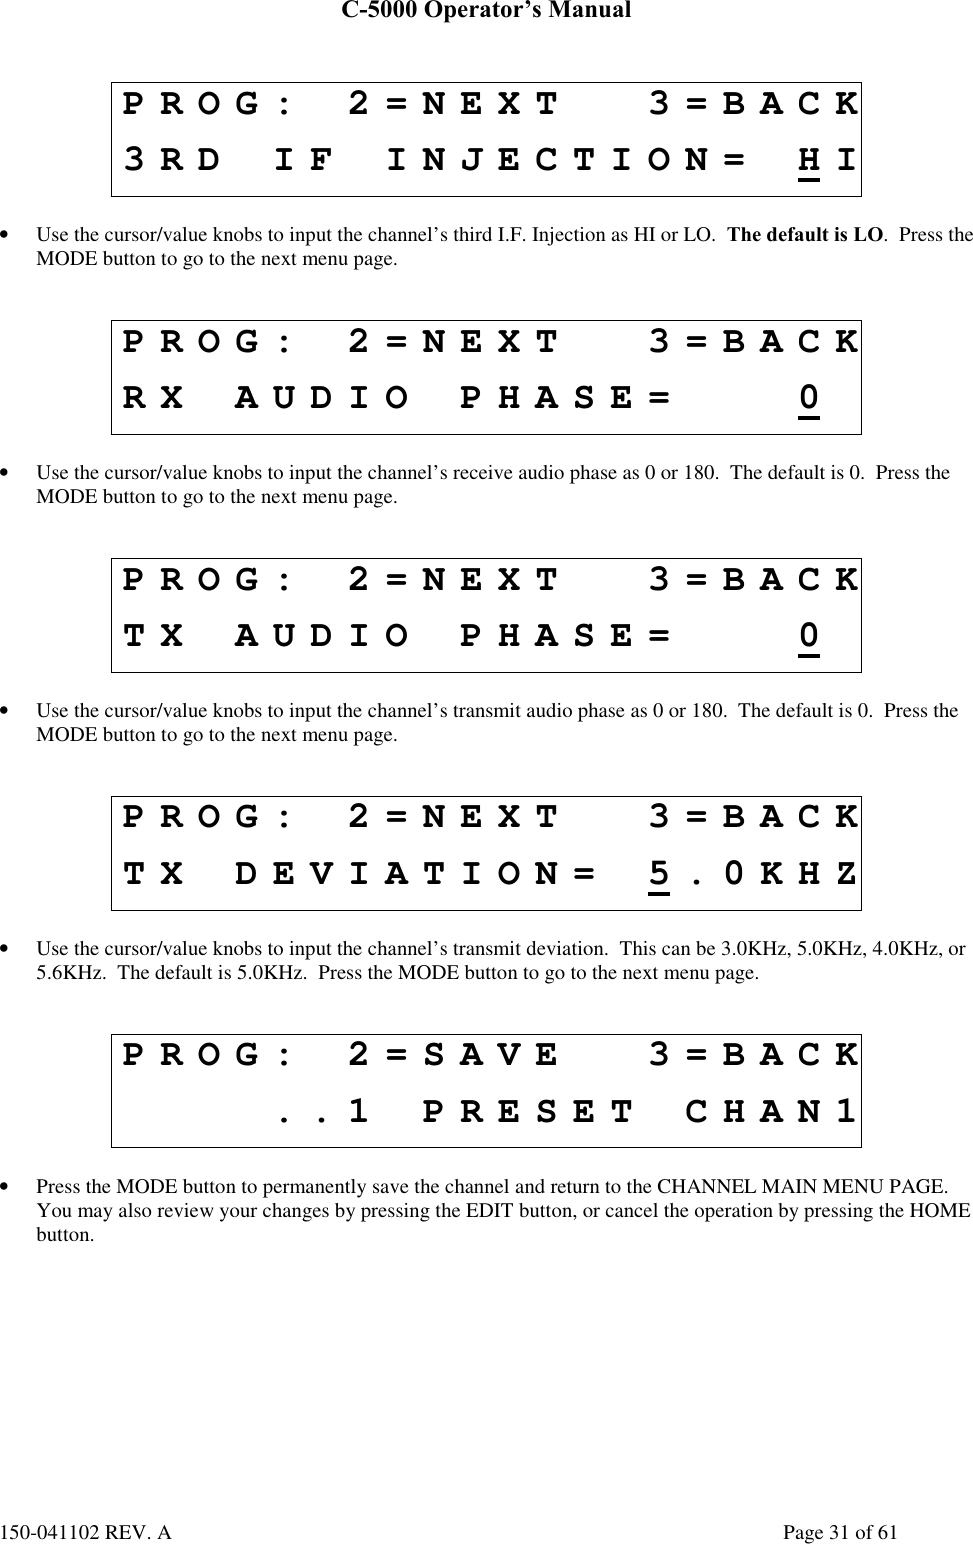 C-5000 Operator’s Manual150-041102 REV. A Page 31 of 61PROG: 2=NEXT 3=BACK3RD IF INJECTION= HI• Use the cursor/value knobs to input the channel’s third I.F. Injection as HI or LO.  The default is LO.  Press theMODE button to go to the next menu page.PROG: 2=NEXT 3=BACKRX AUDIO PHASE= 0• Use the cursor/value knobs to input the channel’s receive audio phase as 0 or 180.  The default is 0.  Press theMODE button to go to the next menu page.PROG: 2=NEXT 3=BACKTX AUDIO PHASE= 0• Use the cursor/value knobs to input the channel’s transmit audio phase as 0 or 180.  The default is 0.  Press theMODE button to go to the next menu page.PROG: 2=NEXT 3=BACKTX DEVIATION= 5.0KHZ• Use the cursor/value knobs to input the channel’s transmit deviation.  This can be 3.0KHz, 5.0KHz, 4.0KHz, or5.6KHz.  The default is 5.0KHz.  Press the MODE button to go to the next menu page.PROG: 2=SAVE 3=BACK..1 PRESET CHAN1• Press the MODE button to permanently save the channel and return to the CHANNEL MAIN MENU PAGE.You may also review your changes by pressing the EDIT button, or cancel the operation by pressing the HOMEbutton.